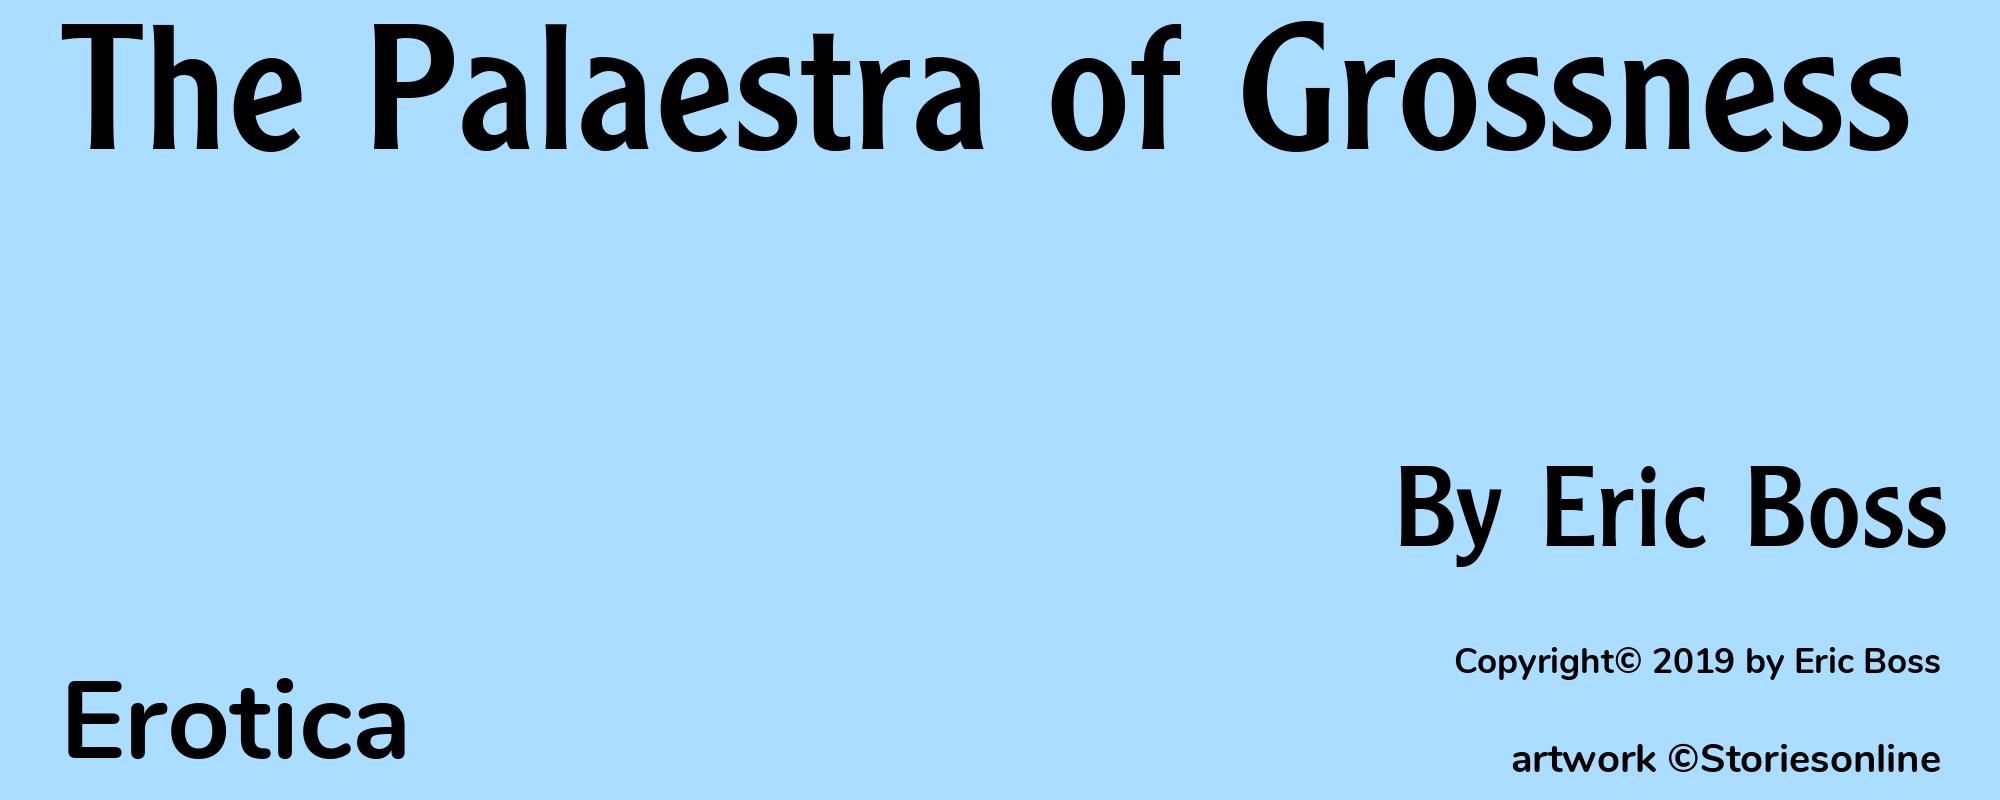 The Palaestra of Grossness - Cover